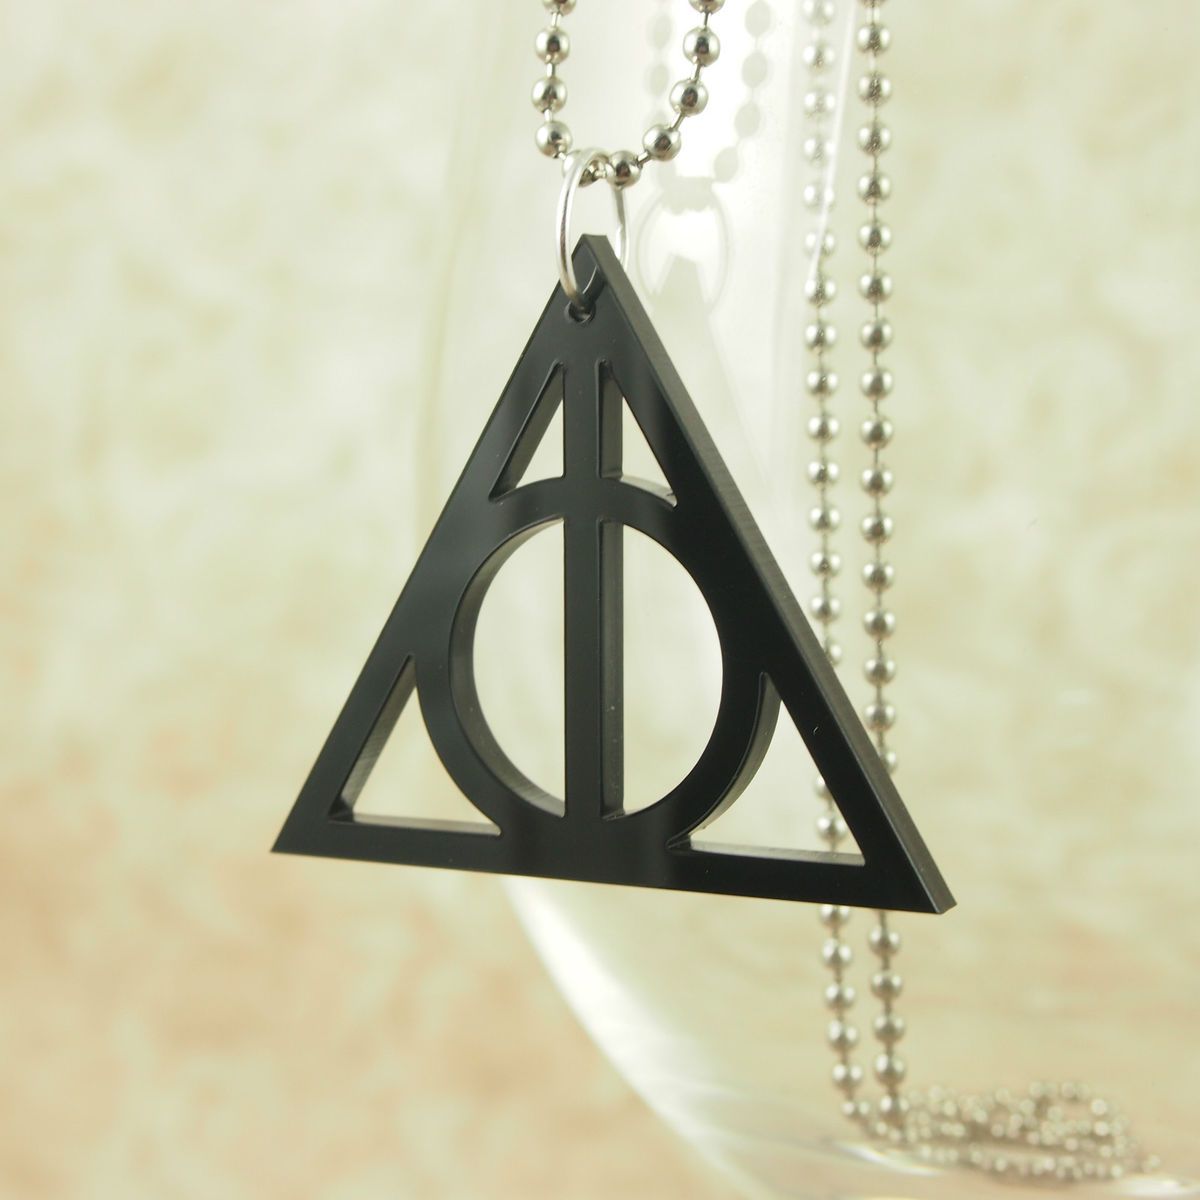   PENDANT HARRY POTTER DEATHLY HALLOWS NECKLACE JEWELRY NEW HANDMADE